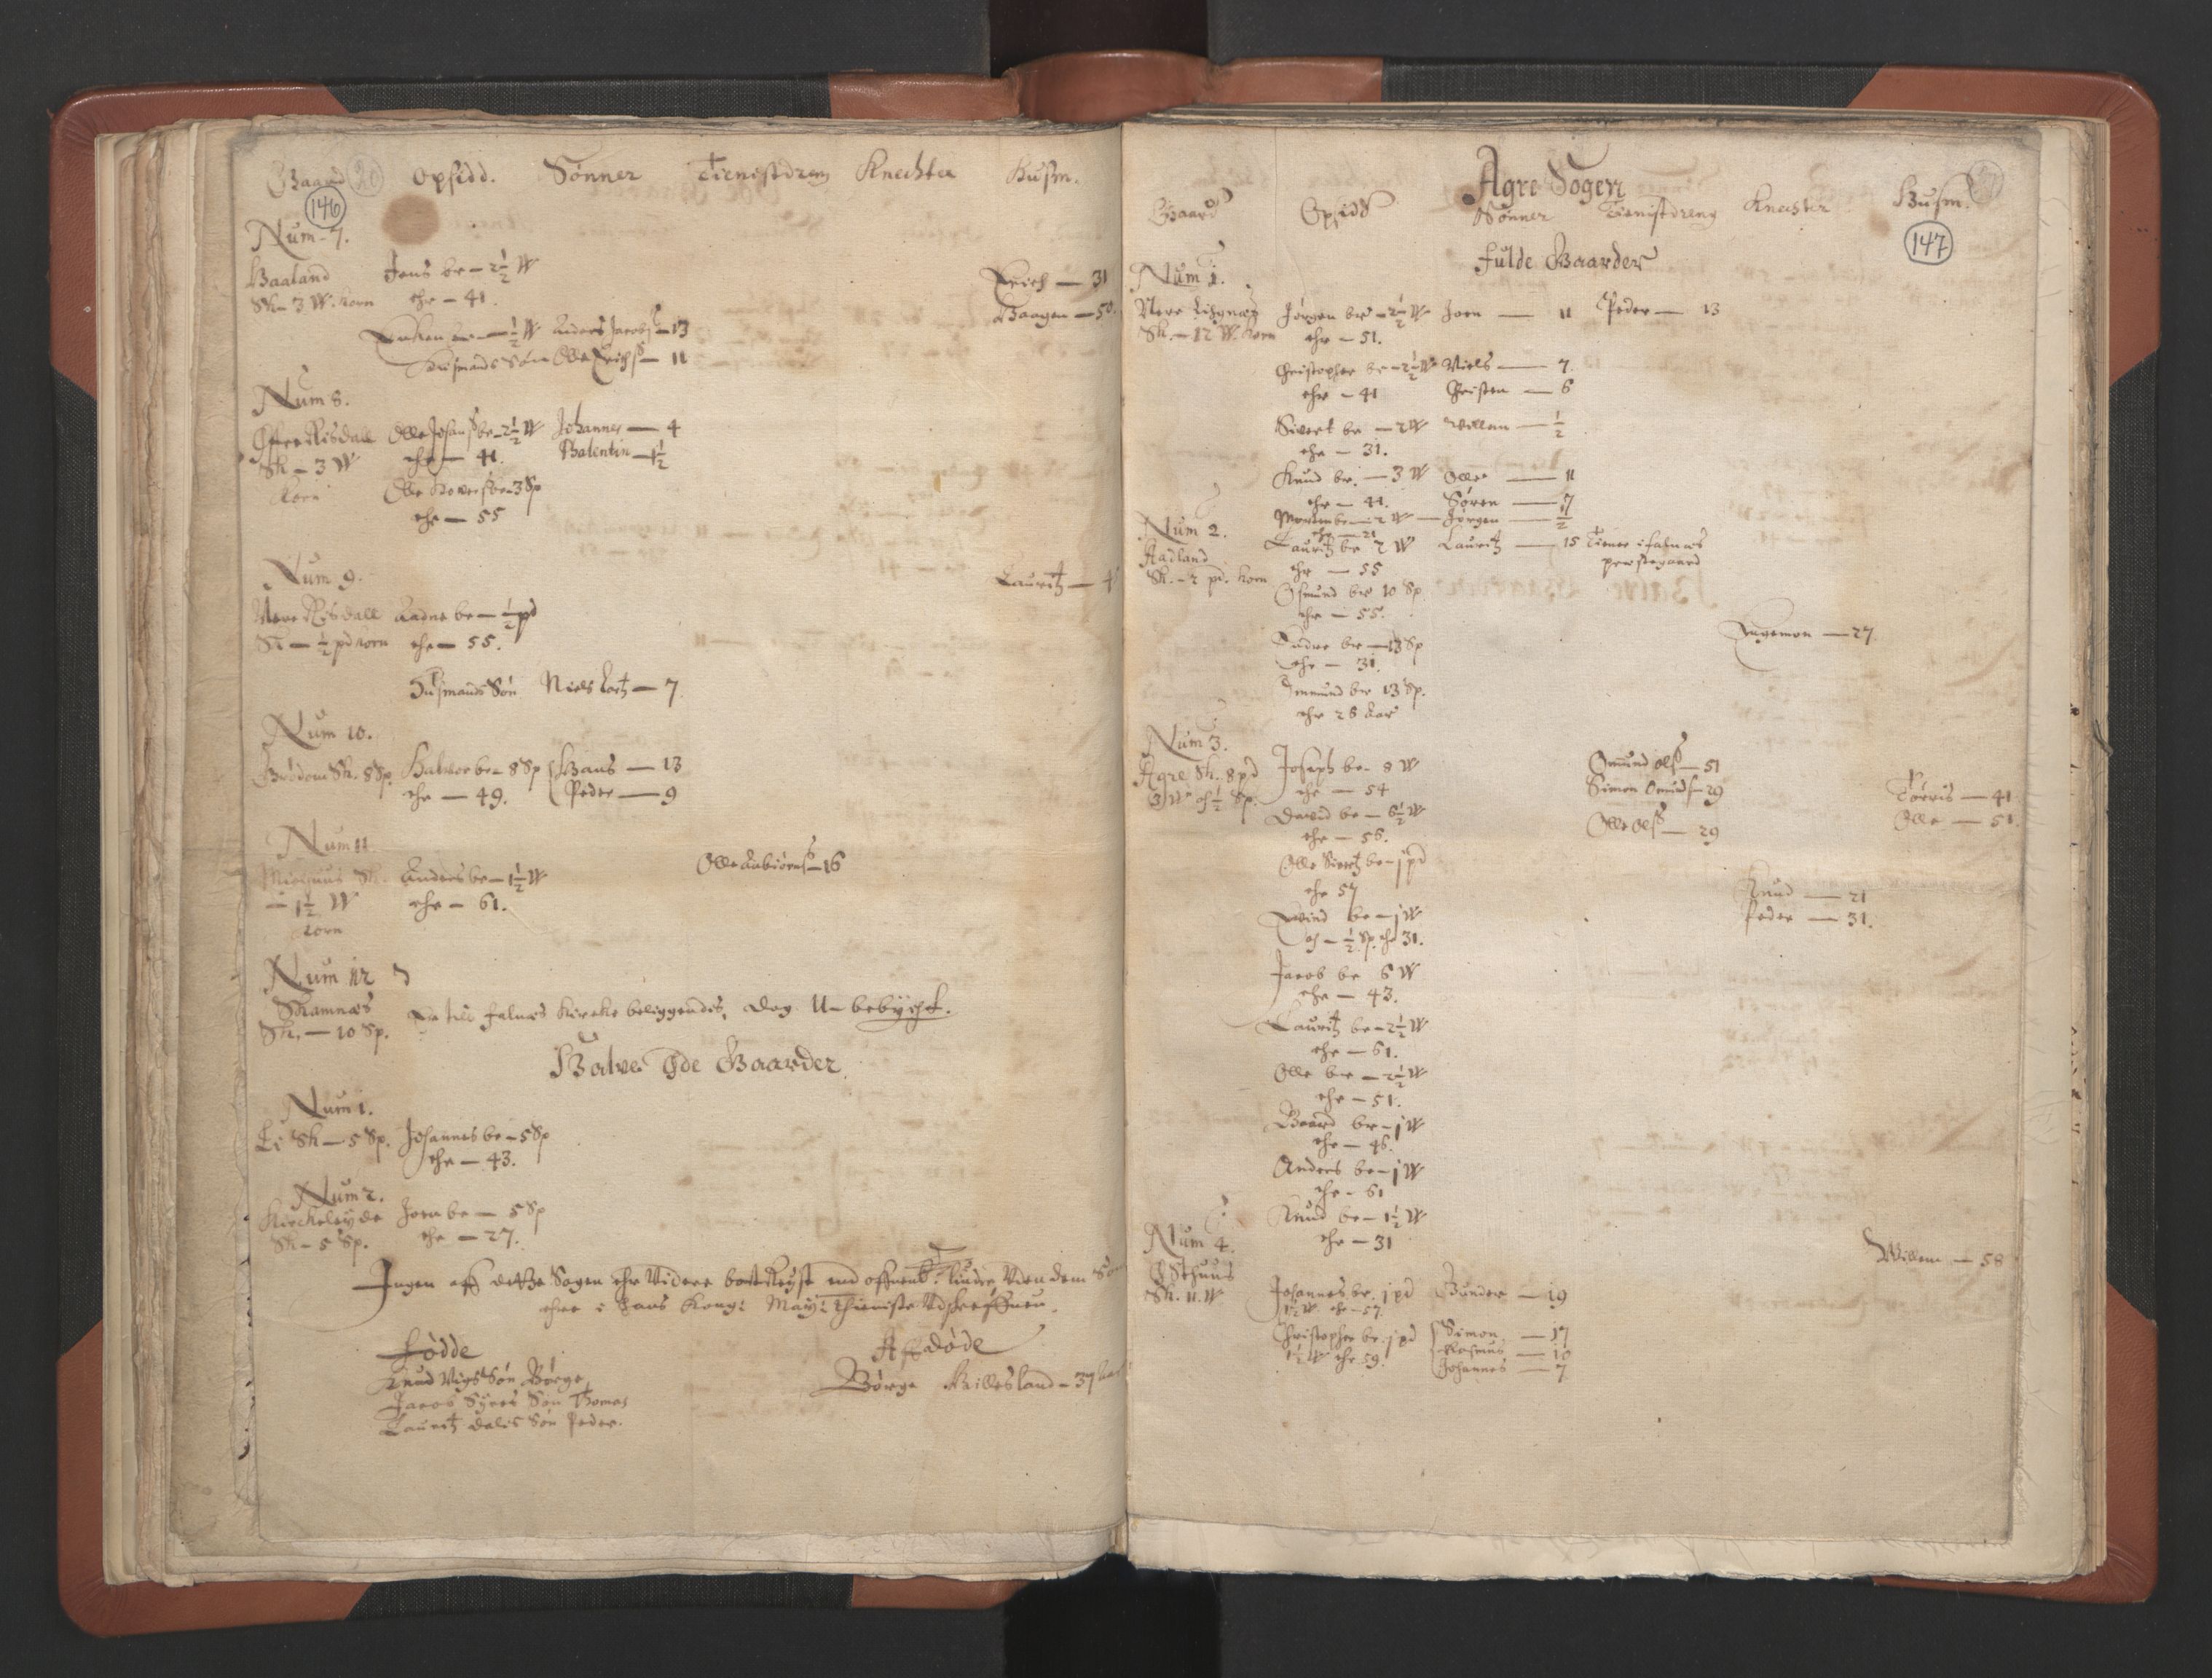 RA, Vicar's Census 1664-1666, no. 18: Stavanger deanery and Karmsund deanery, 1664-1666, p. 146-147